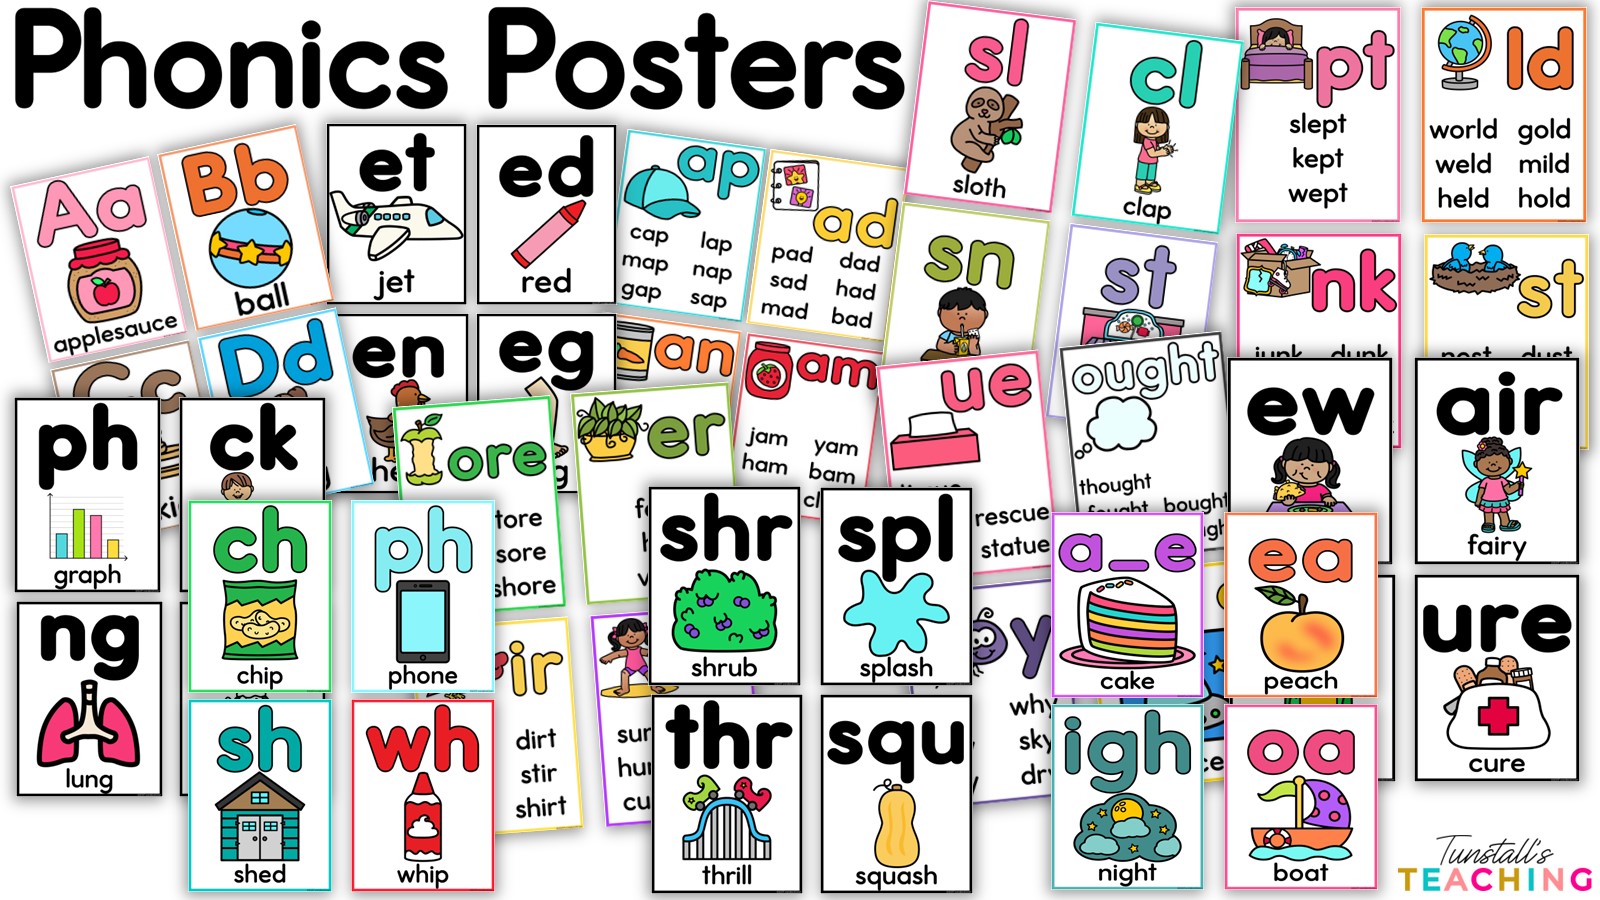 Phonics Posters to Support Structured Literacy